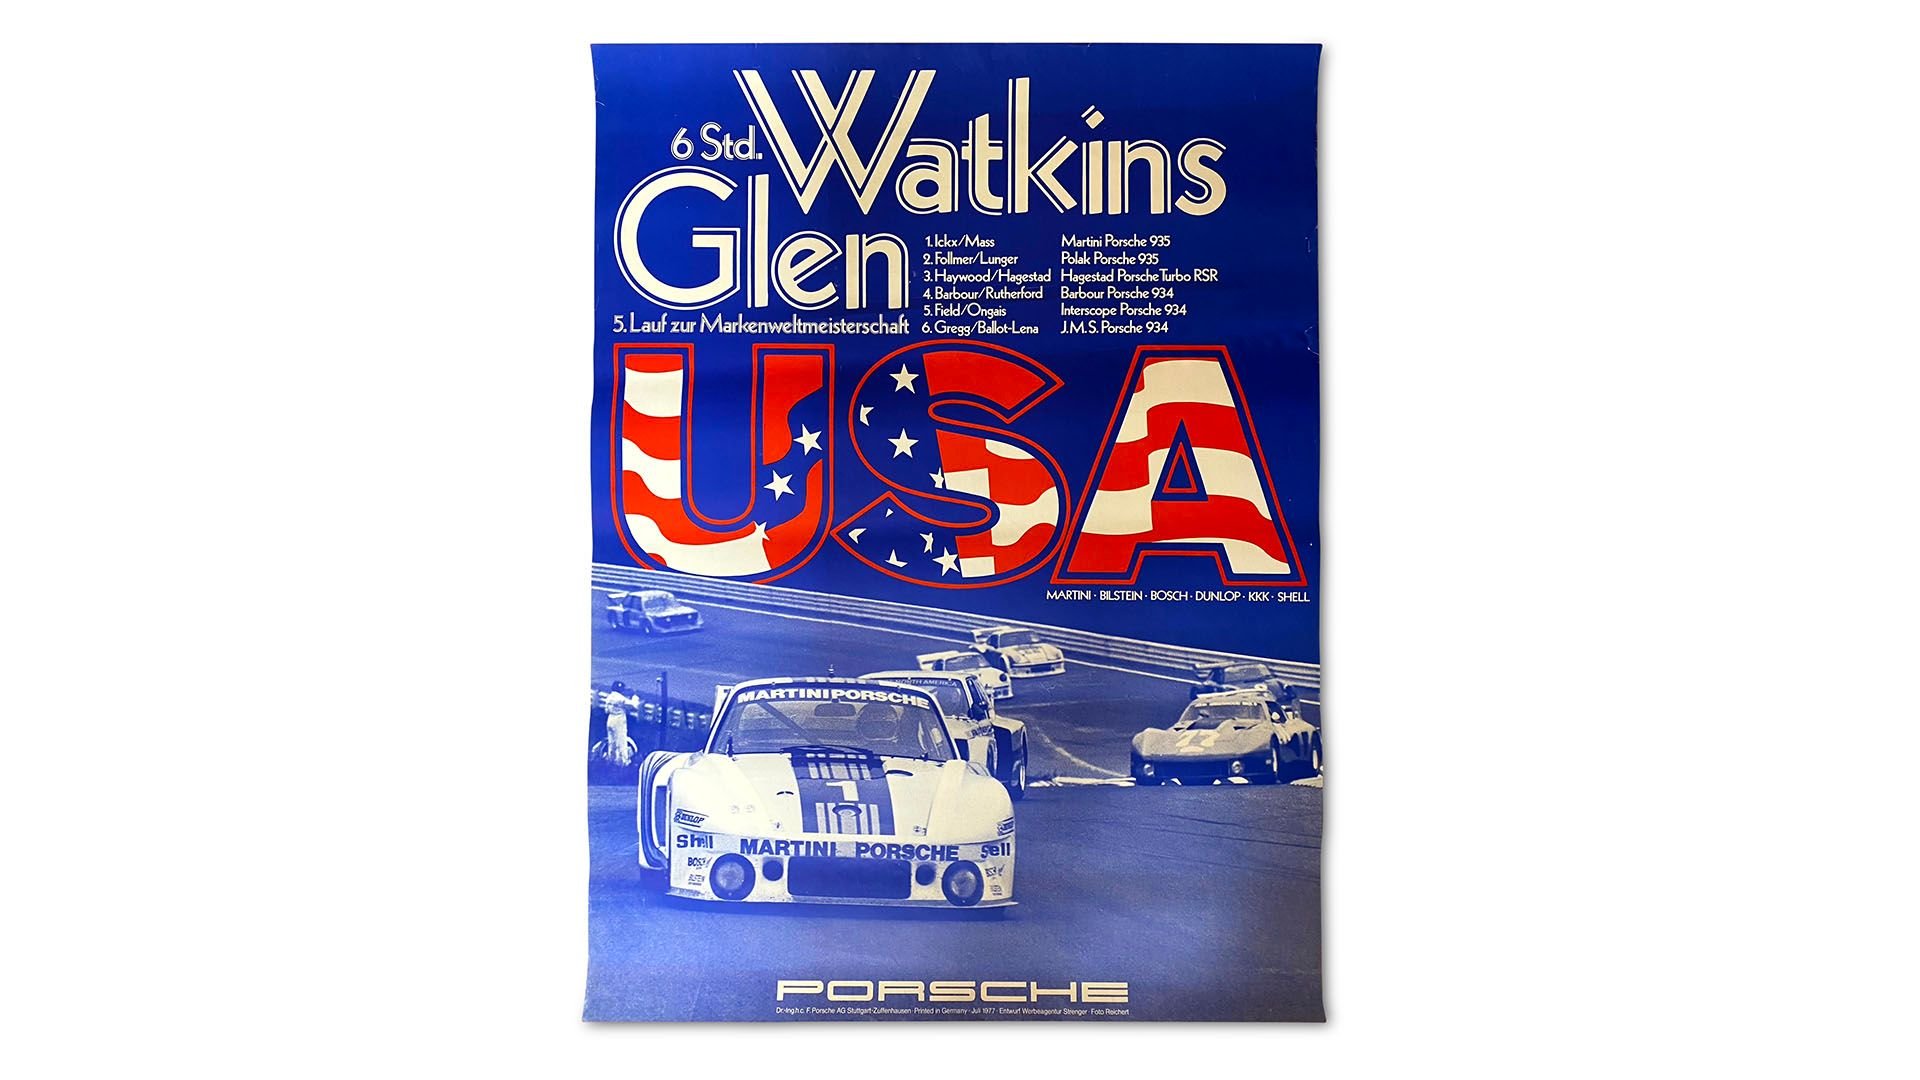 Broad Arrow Auctions | Group of 17 Porsche Factory Racing (934, 935 911 SC Rallye) and Advertising (928) Posters 1977-1979